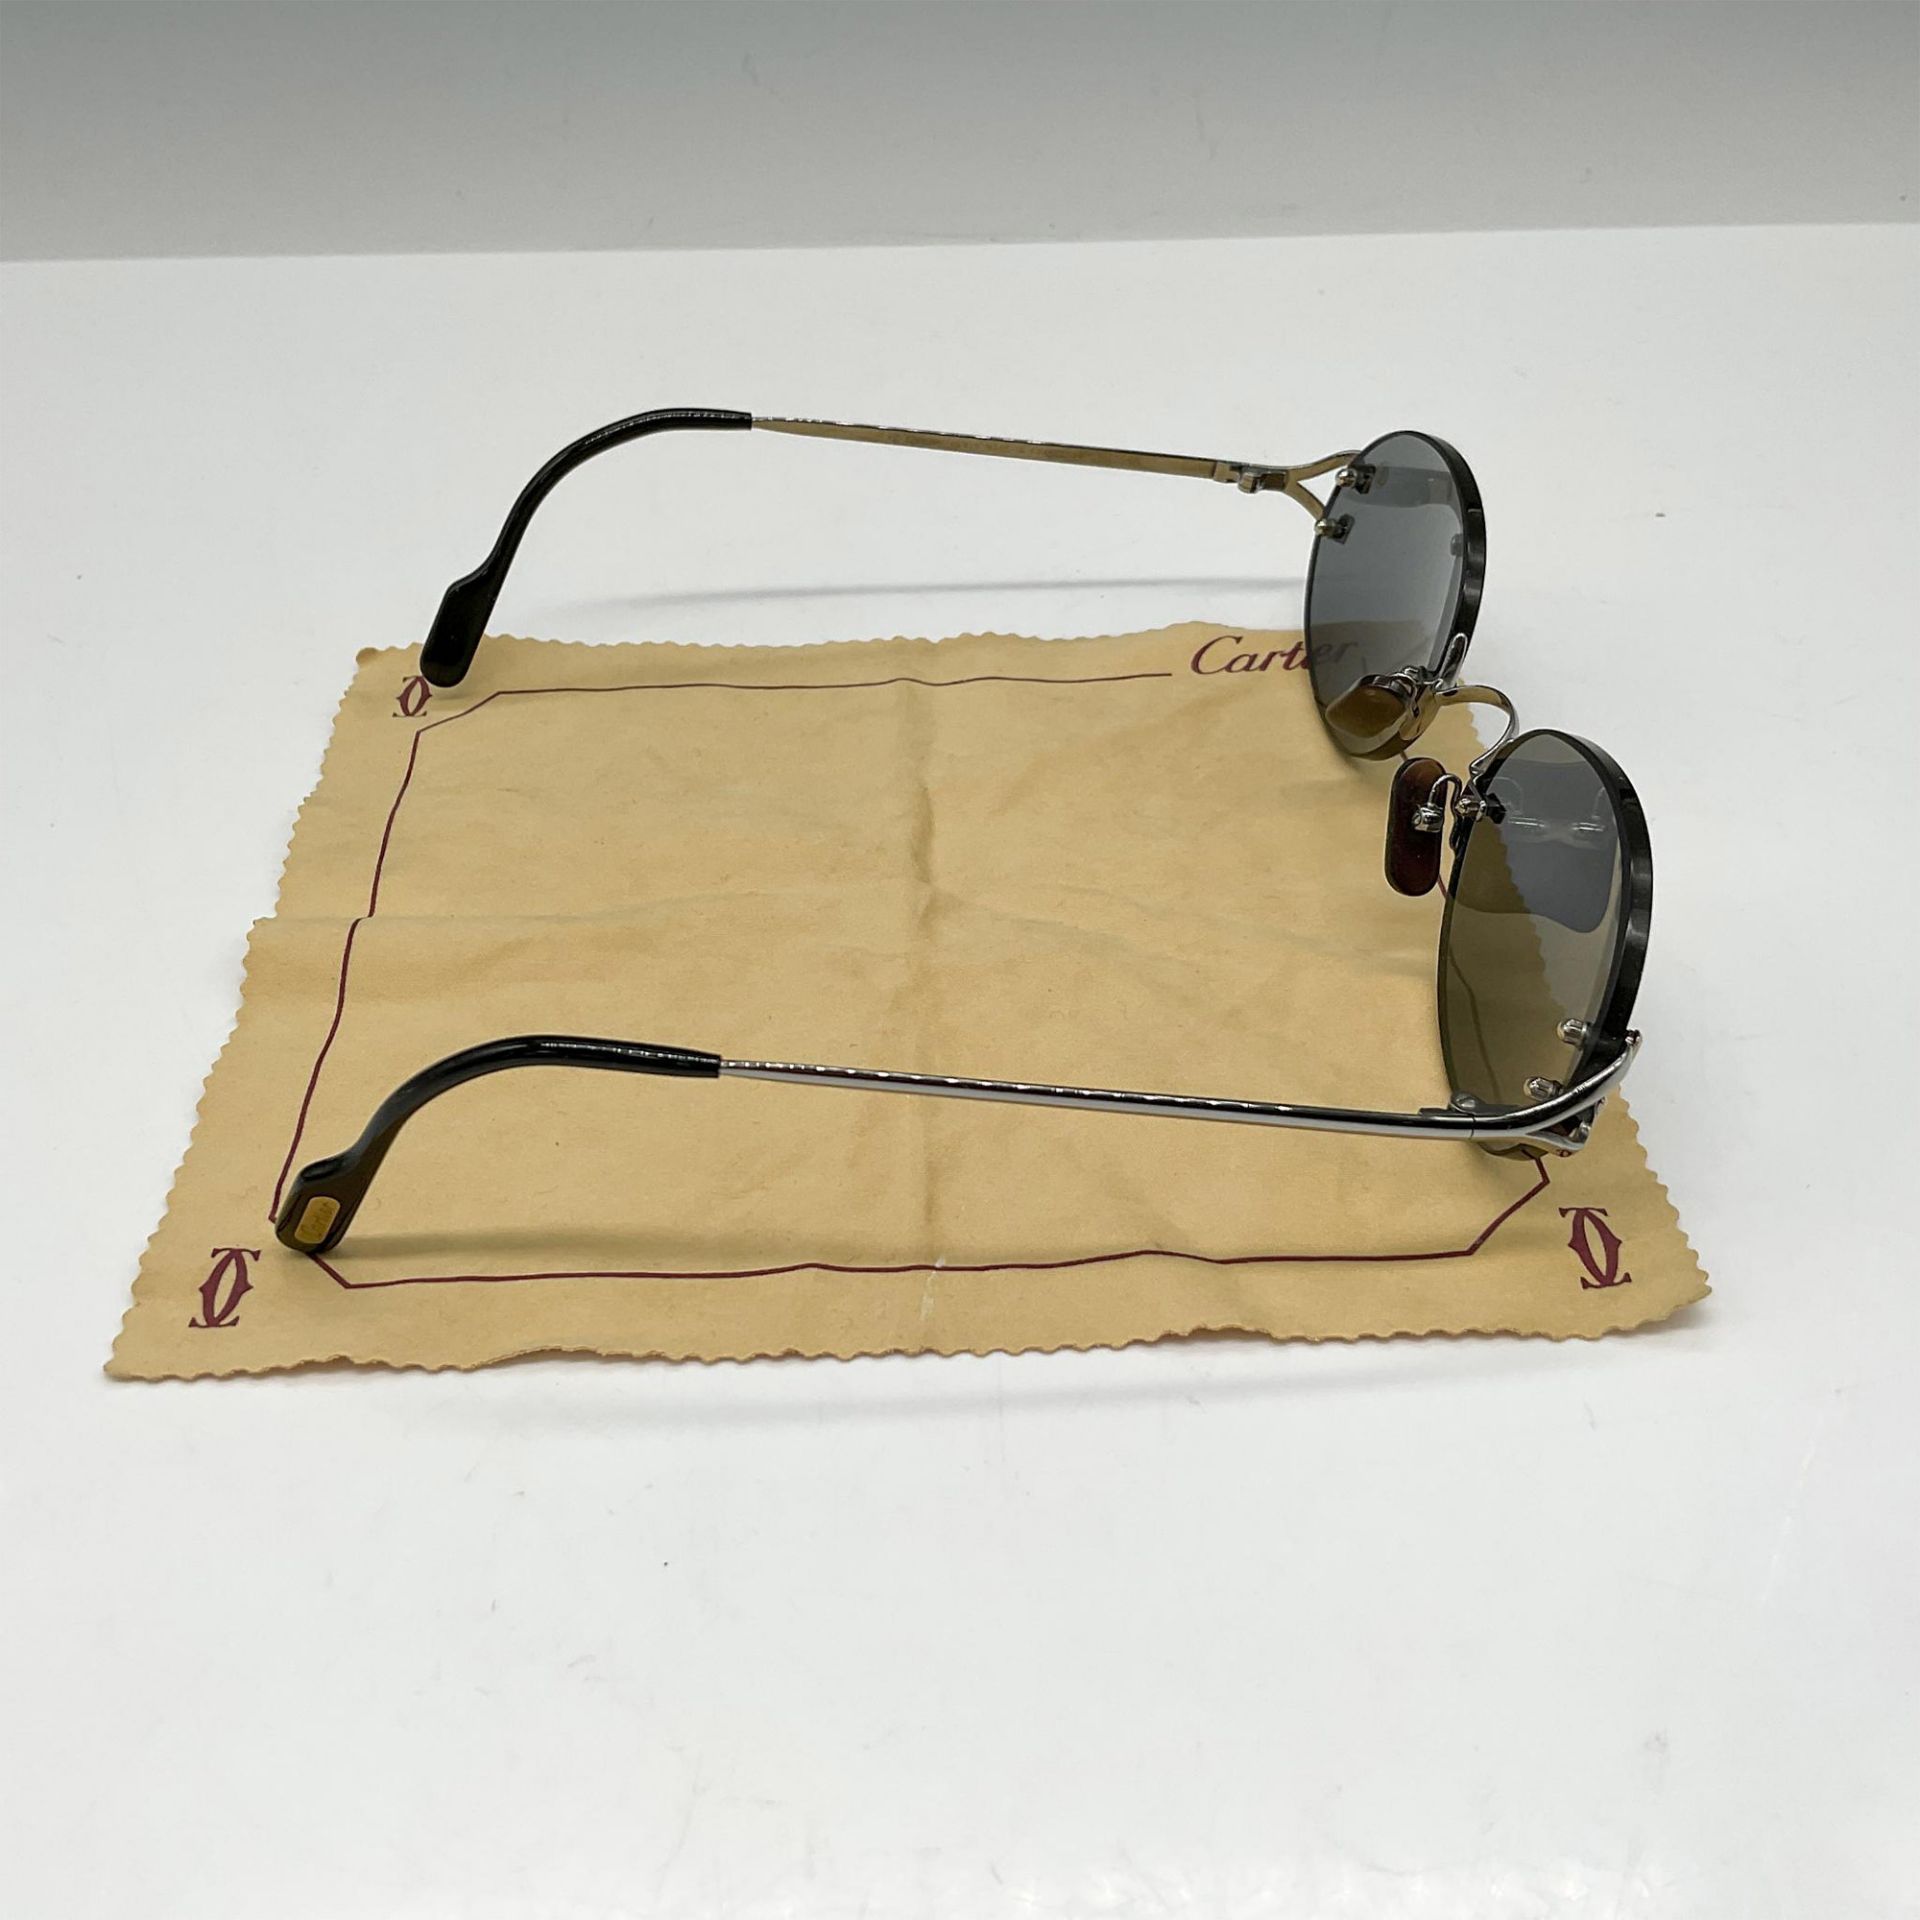 Cartier Scala Rimless Sunglasses with Case - Image 3 of 5